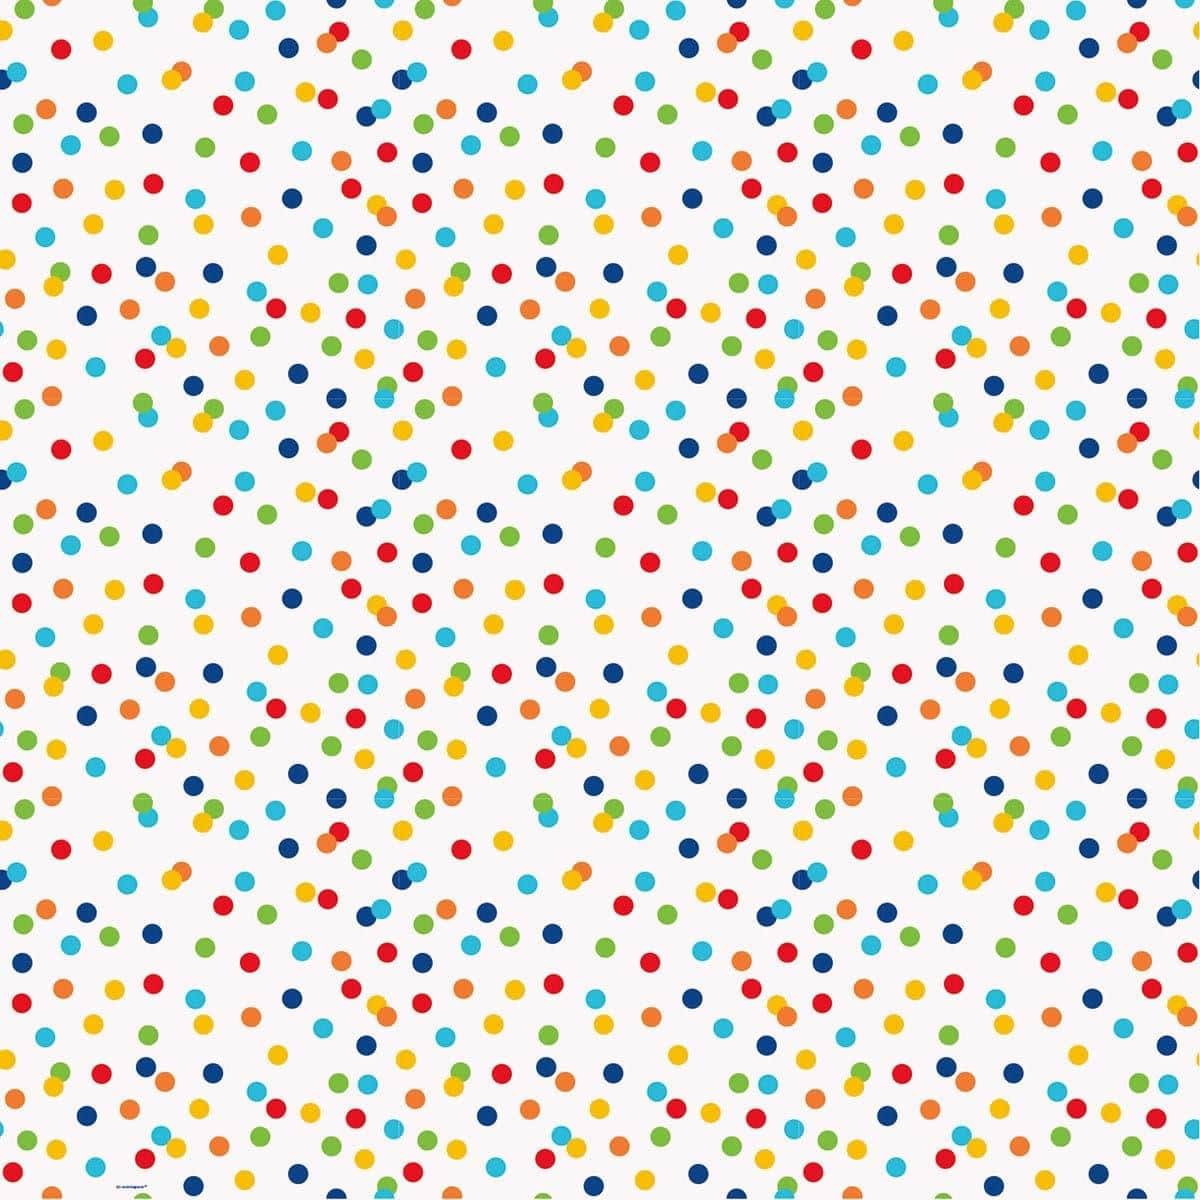 Buy General Birthday Rainbow Polka Dot - Gift Wrap Roll sold at Party Expert